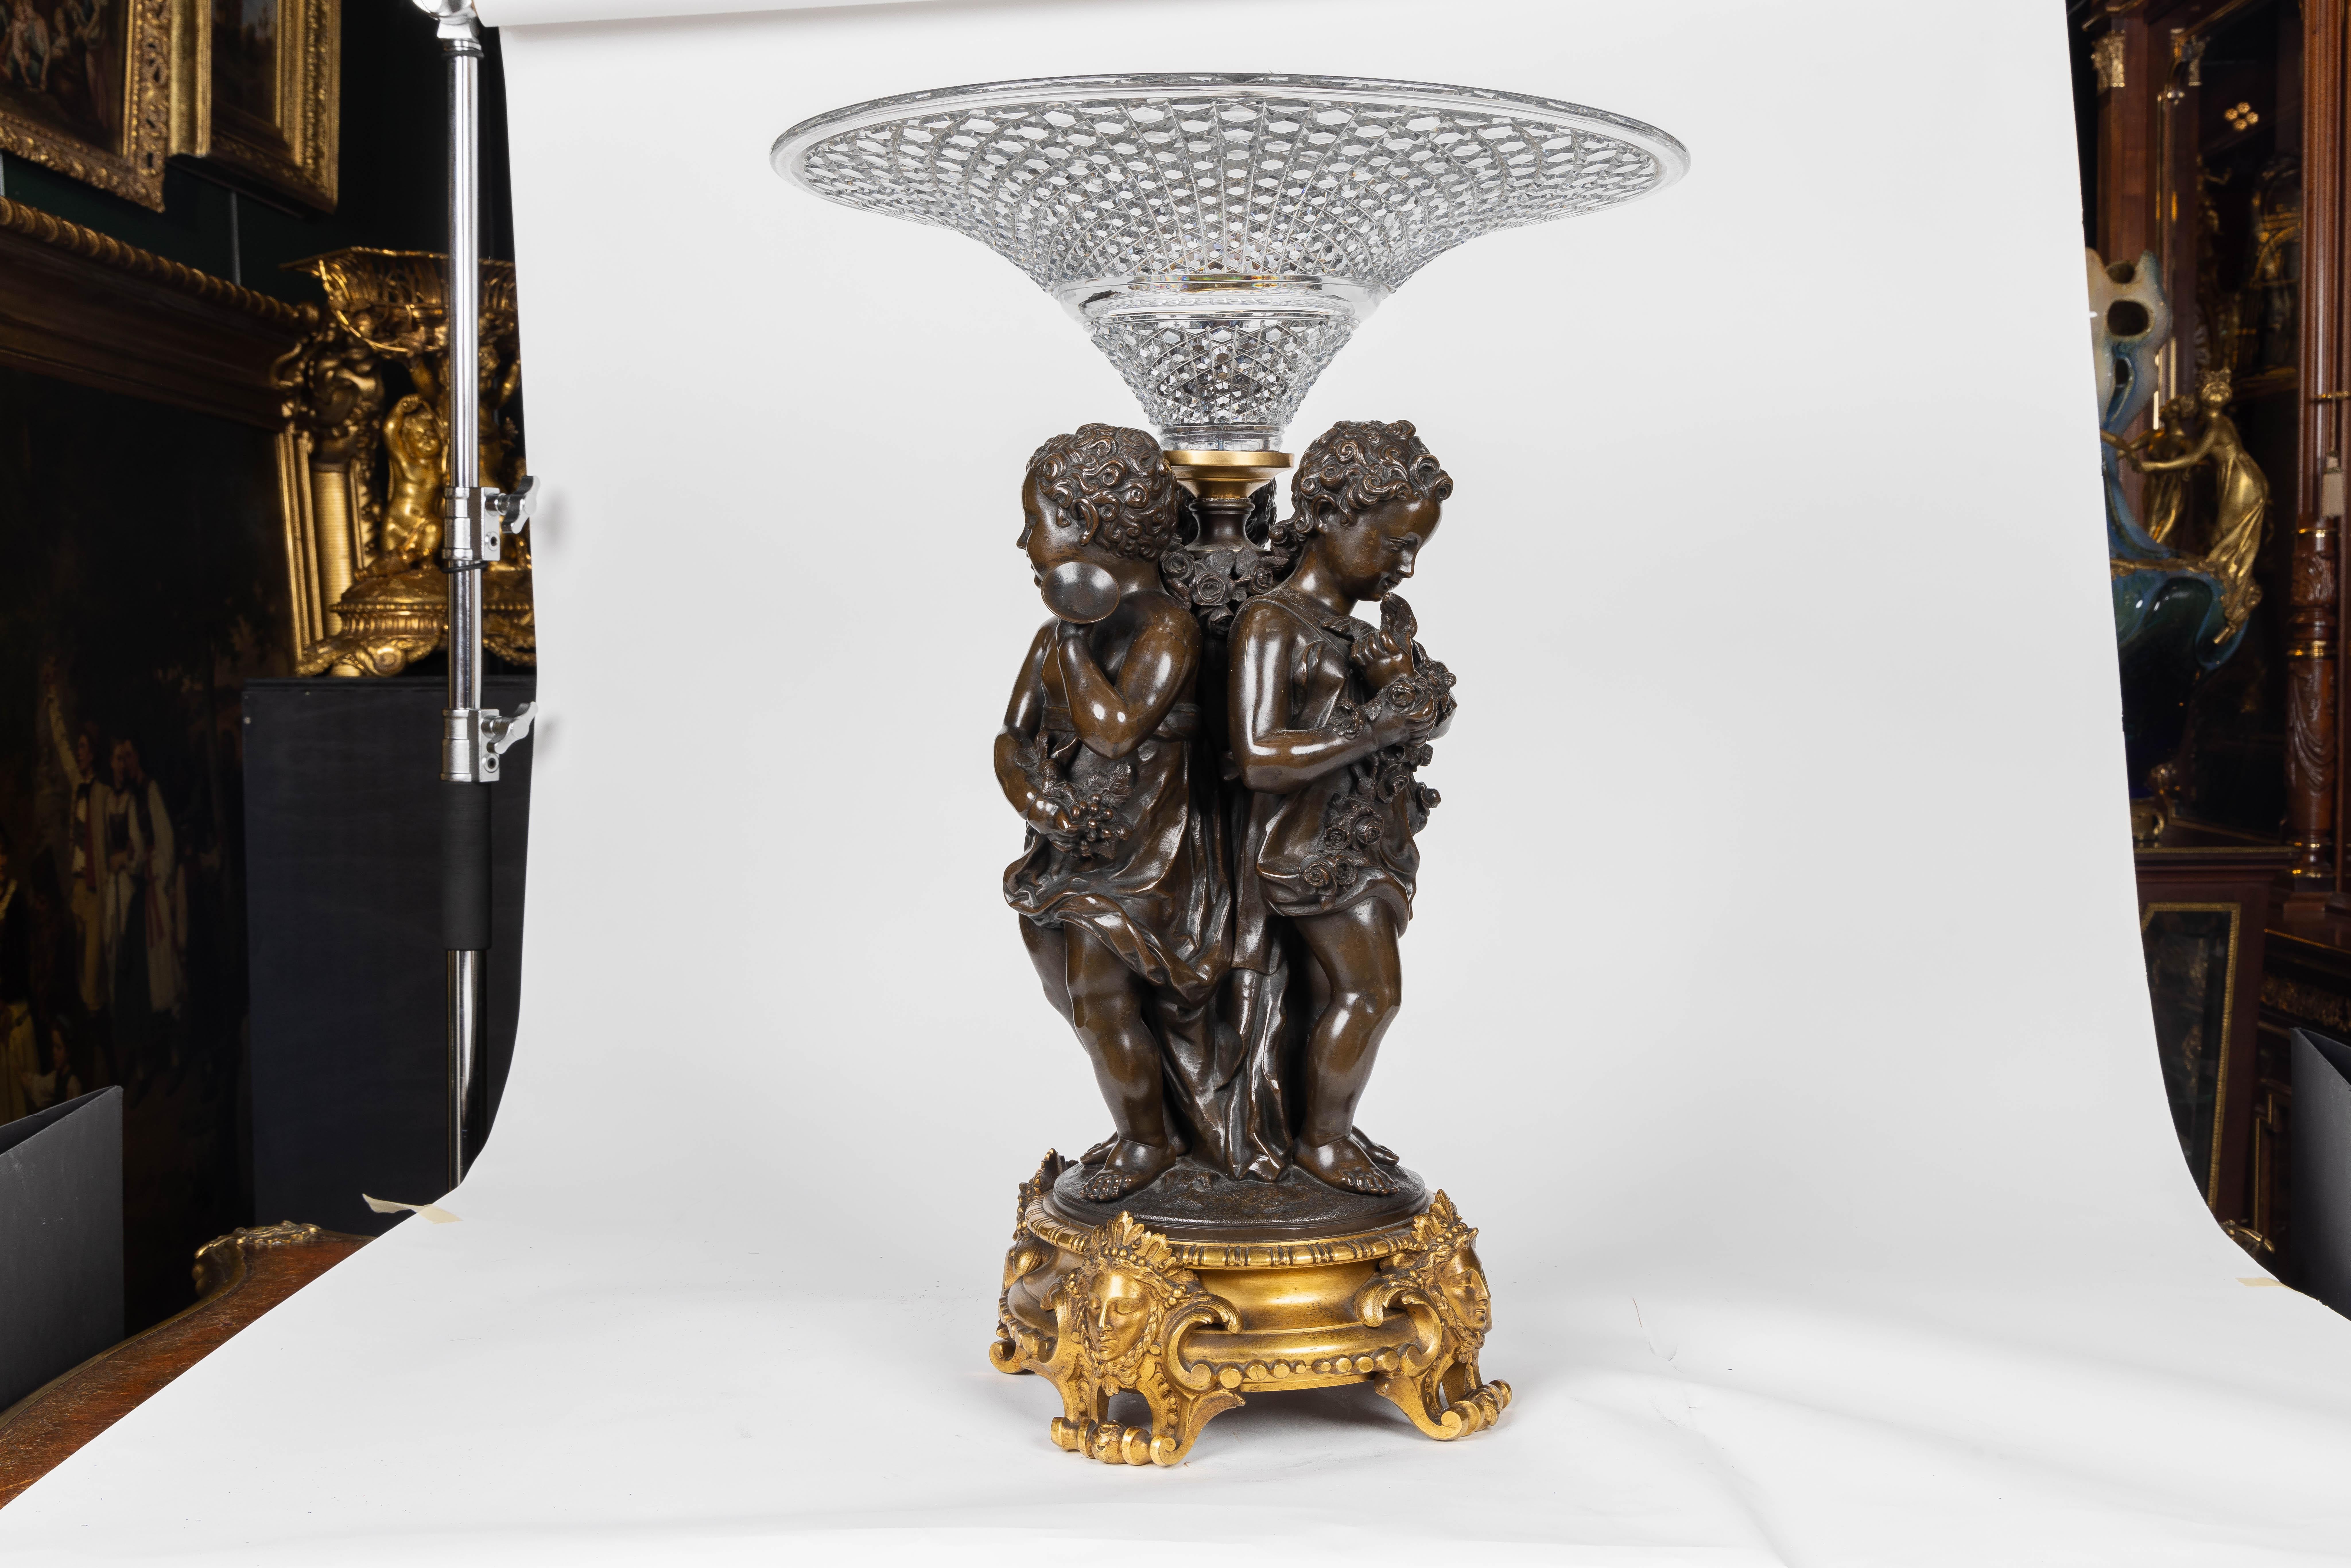 Mathurin Moreau (French, 1822-1912)

A Monumental French Bronze and Crystal Figural Centerpiece

Introducing an extraordinary and monumental French gilt and patinated bronze and crystal figural centerpiece by Mathurin Moreau, mounted on an exquisite